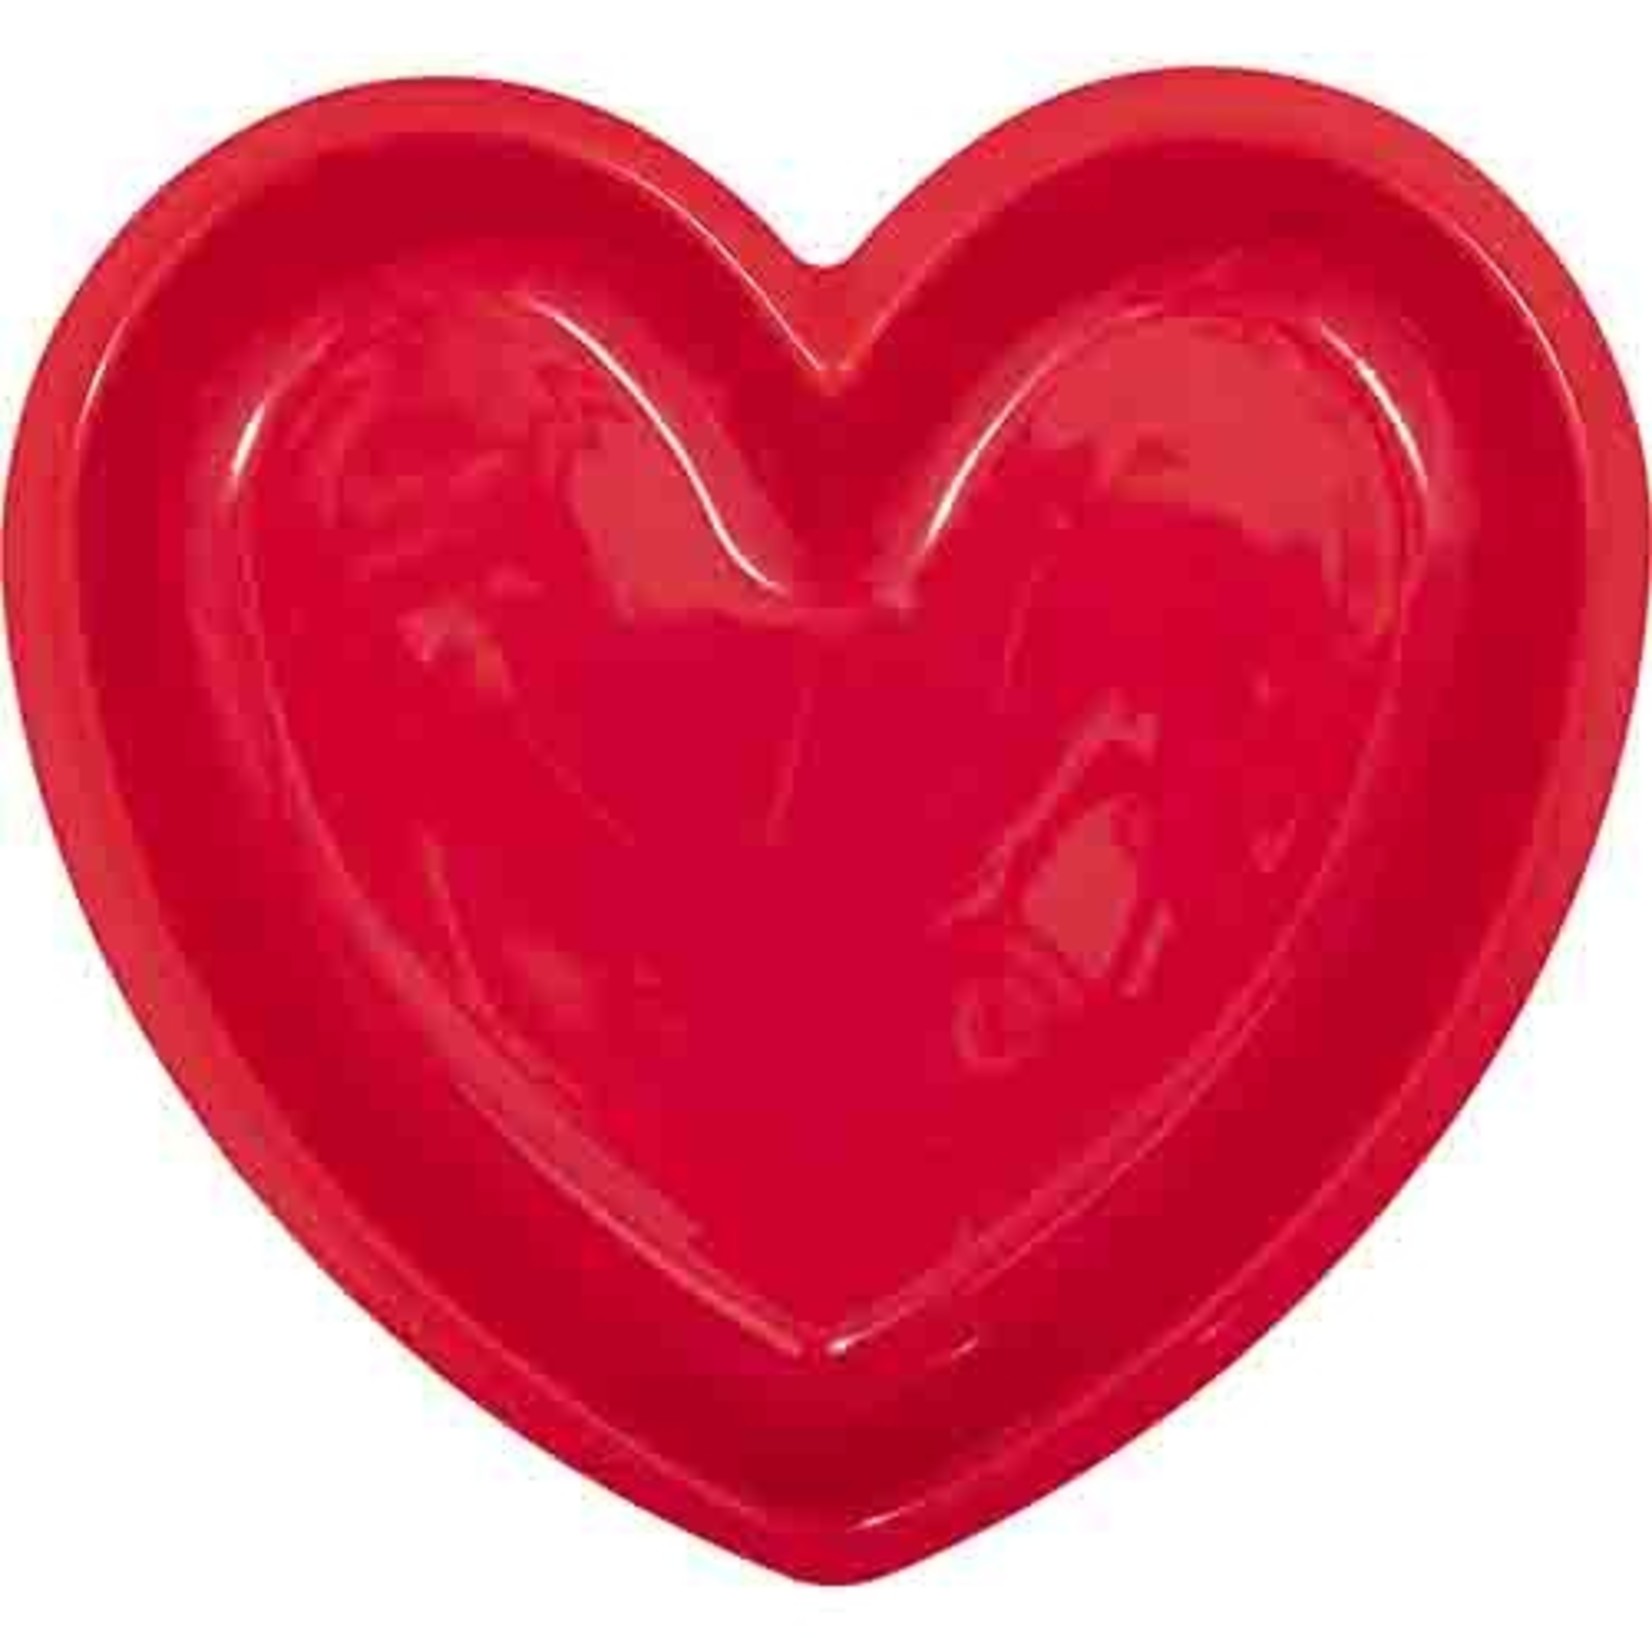 Creative Converting 9" Red Heart Plastic Shaped Tray - 1ct.